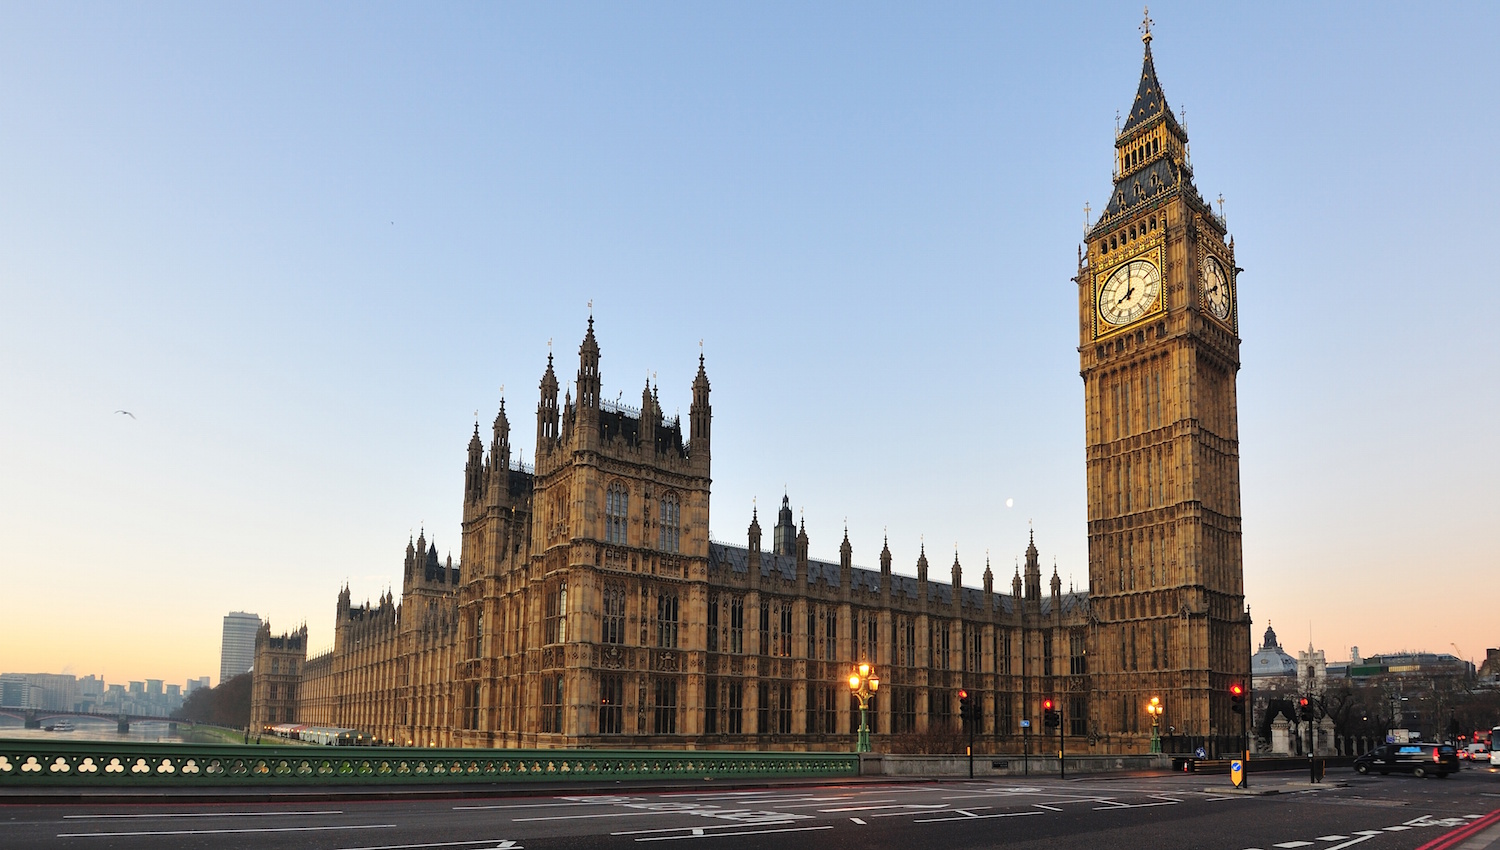 Even If You Don’t Know Much About Geography, Play This World Landmarks Quiz Anyway Big Ben